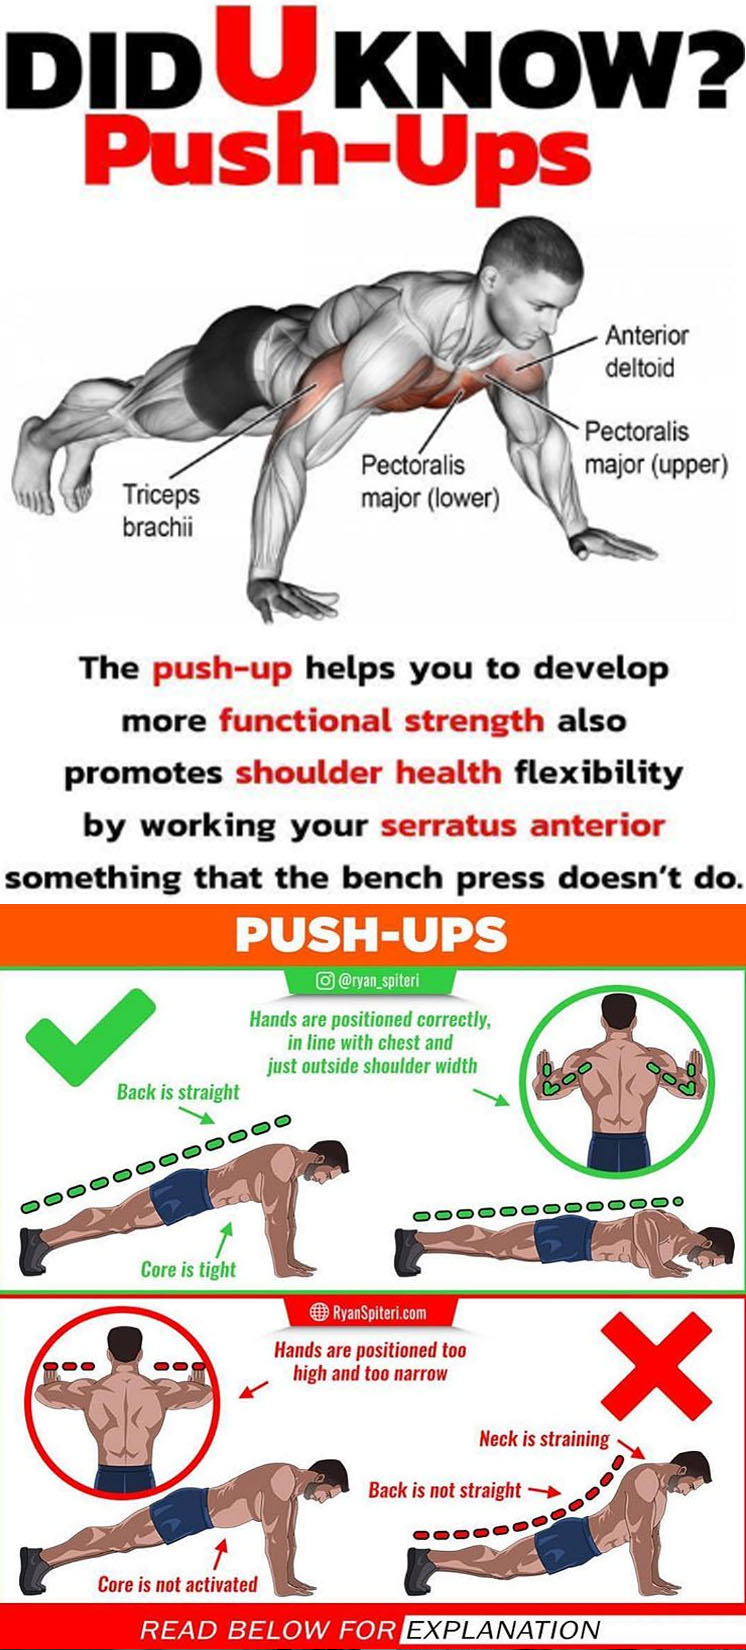 HOW TO PUSH UPS